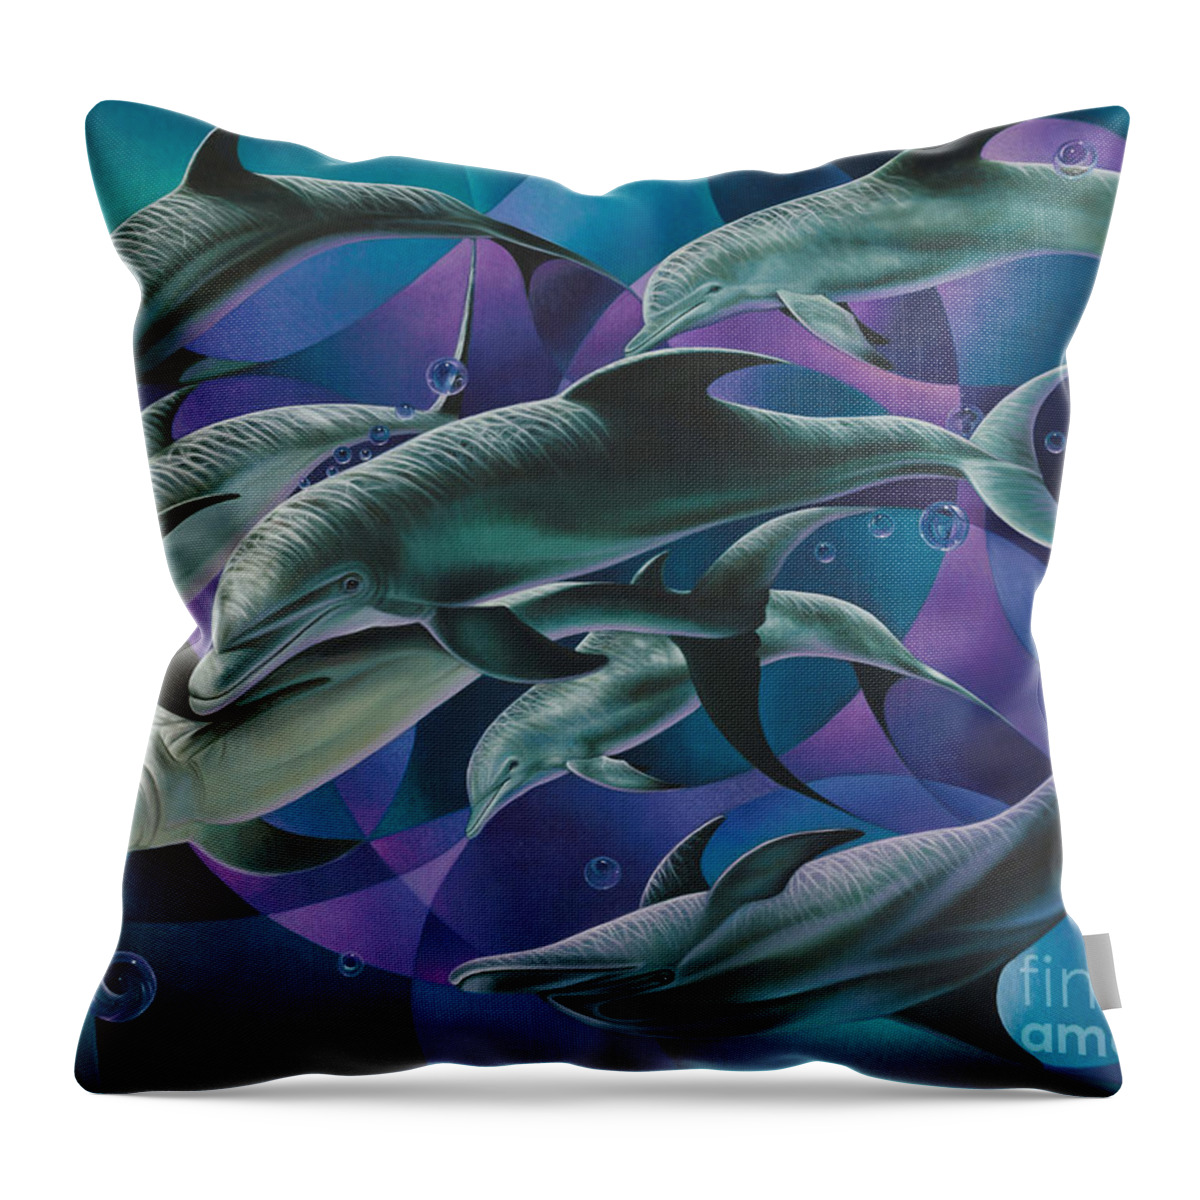 Dolphins Throw Pillow featuring the painting Corazon del Mar by Ricardo Chavez-Mendez